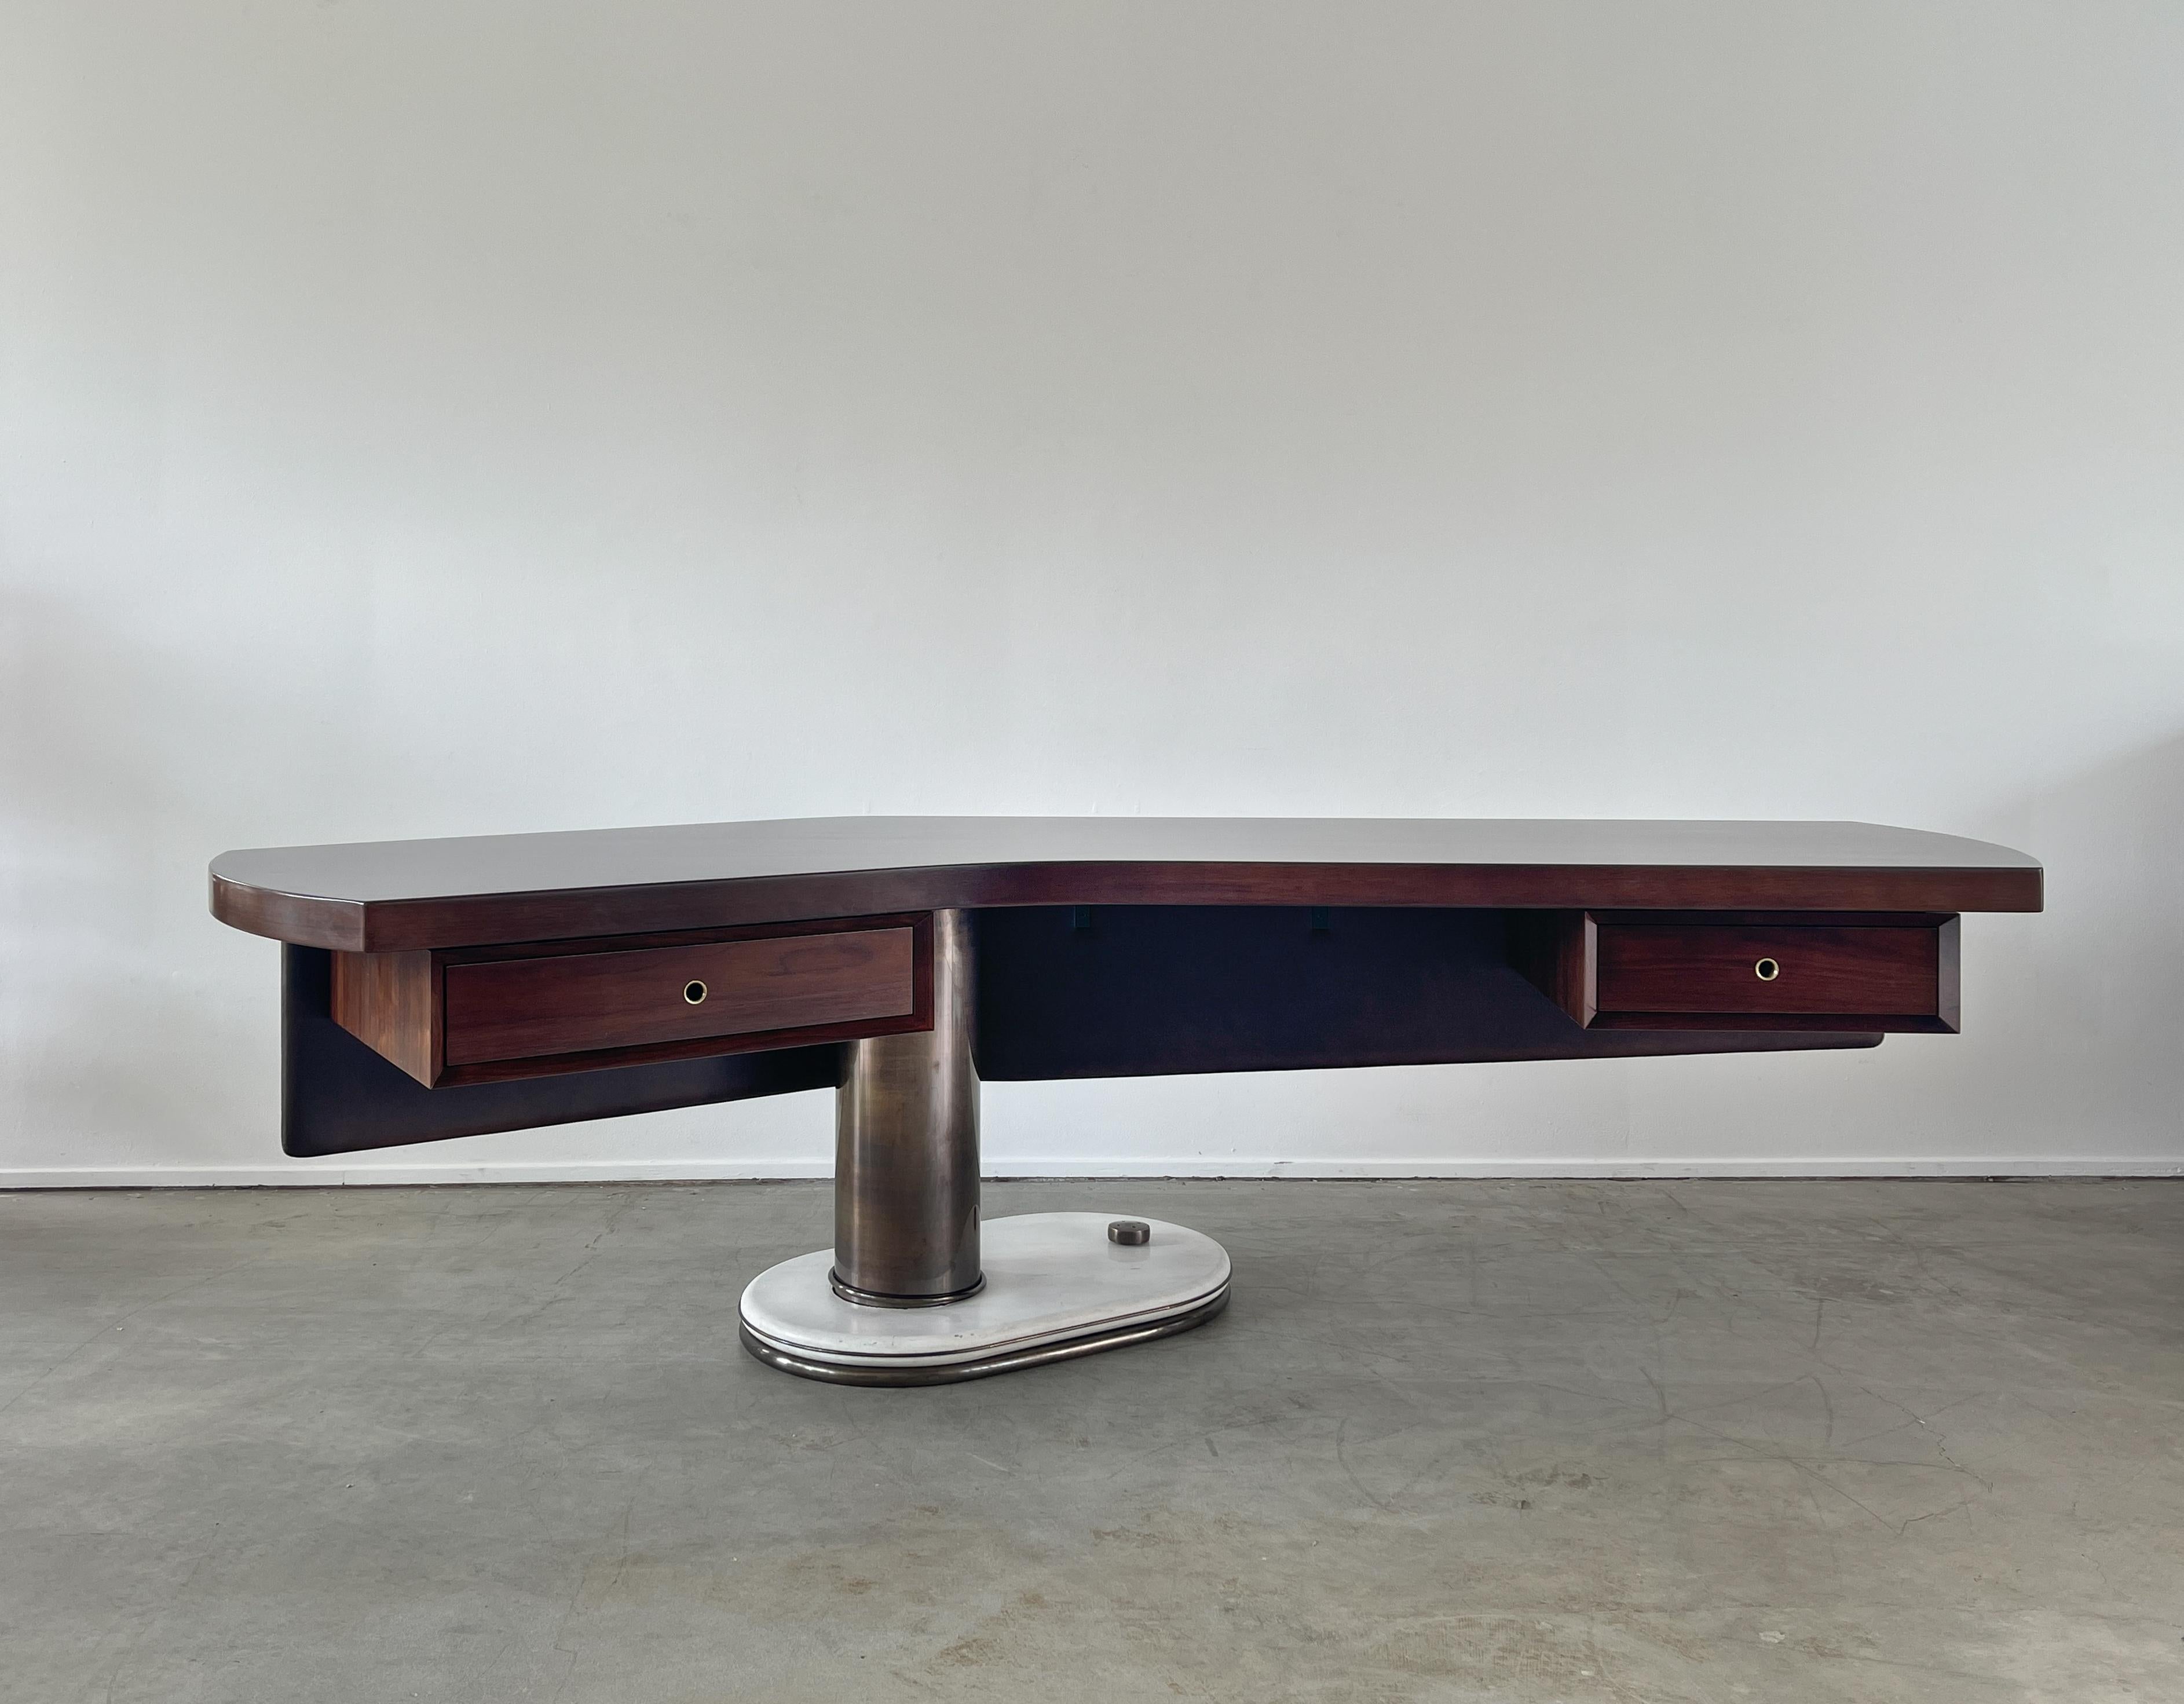 An incredible Italian desk by artist Renzo Schirolli - 
Boomerang shaped walnut top with floating leatherette covered modesty panel and pedestal drawers 
Cylindrical bronze column sits on solid marble base supporting cantilevered asymmetrical desk